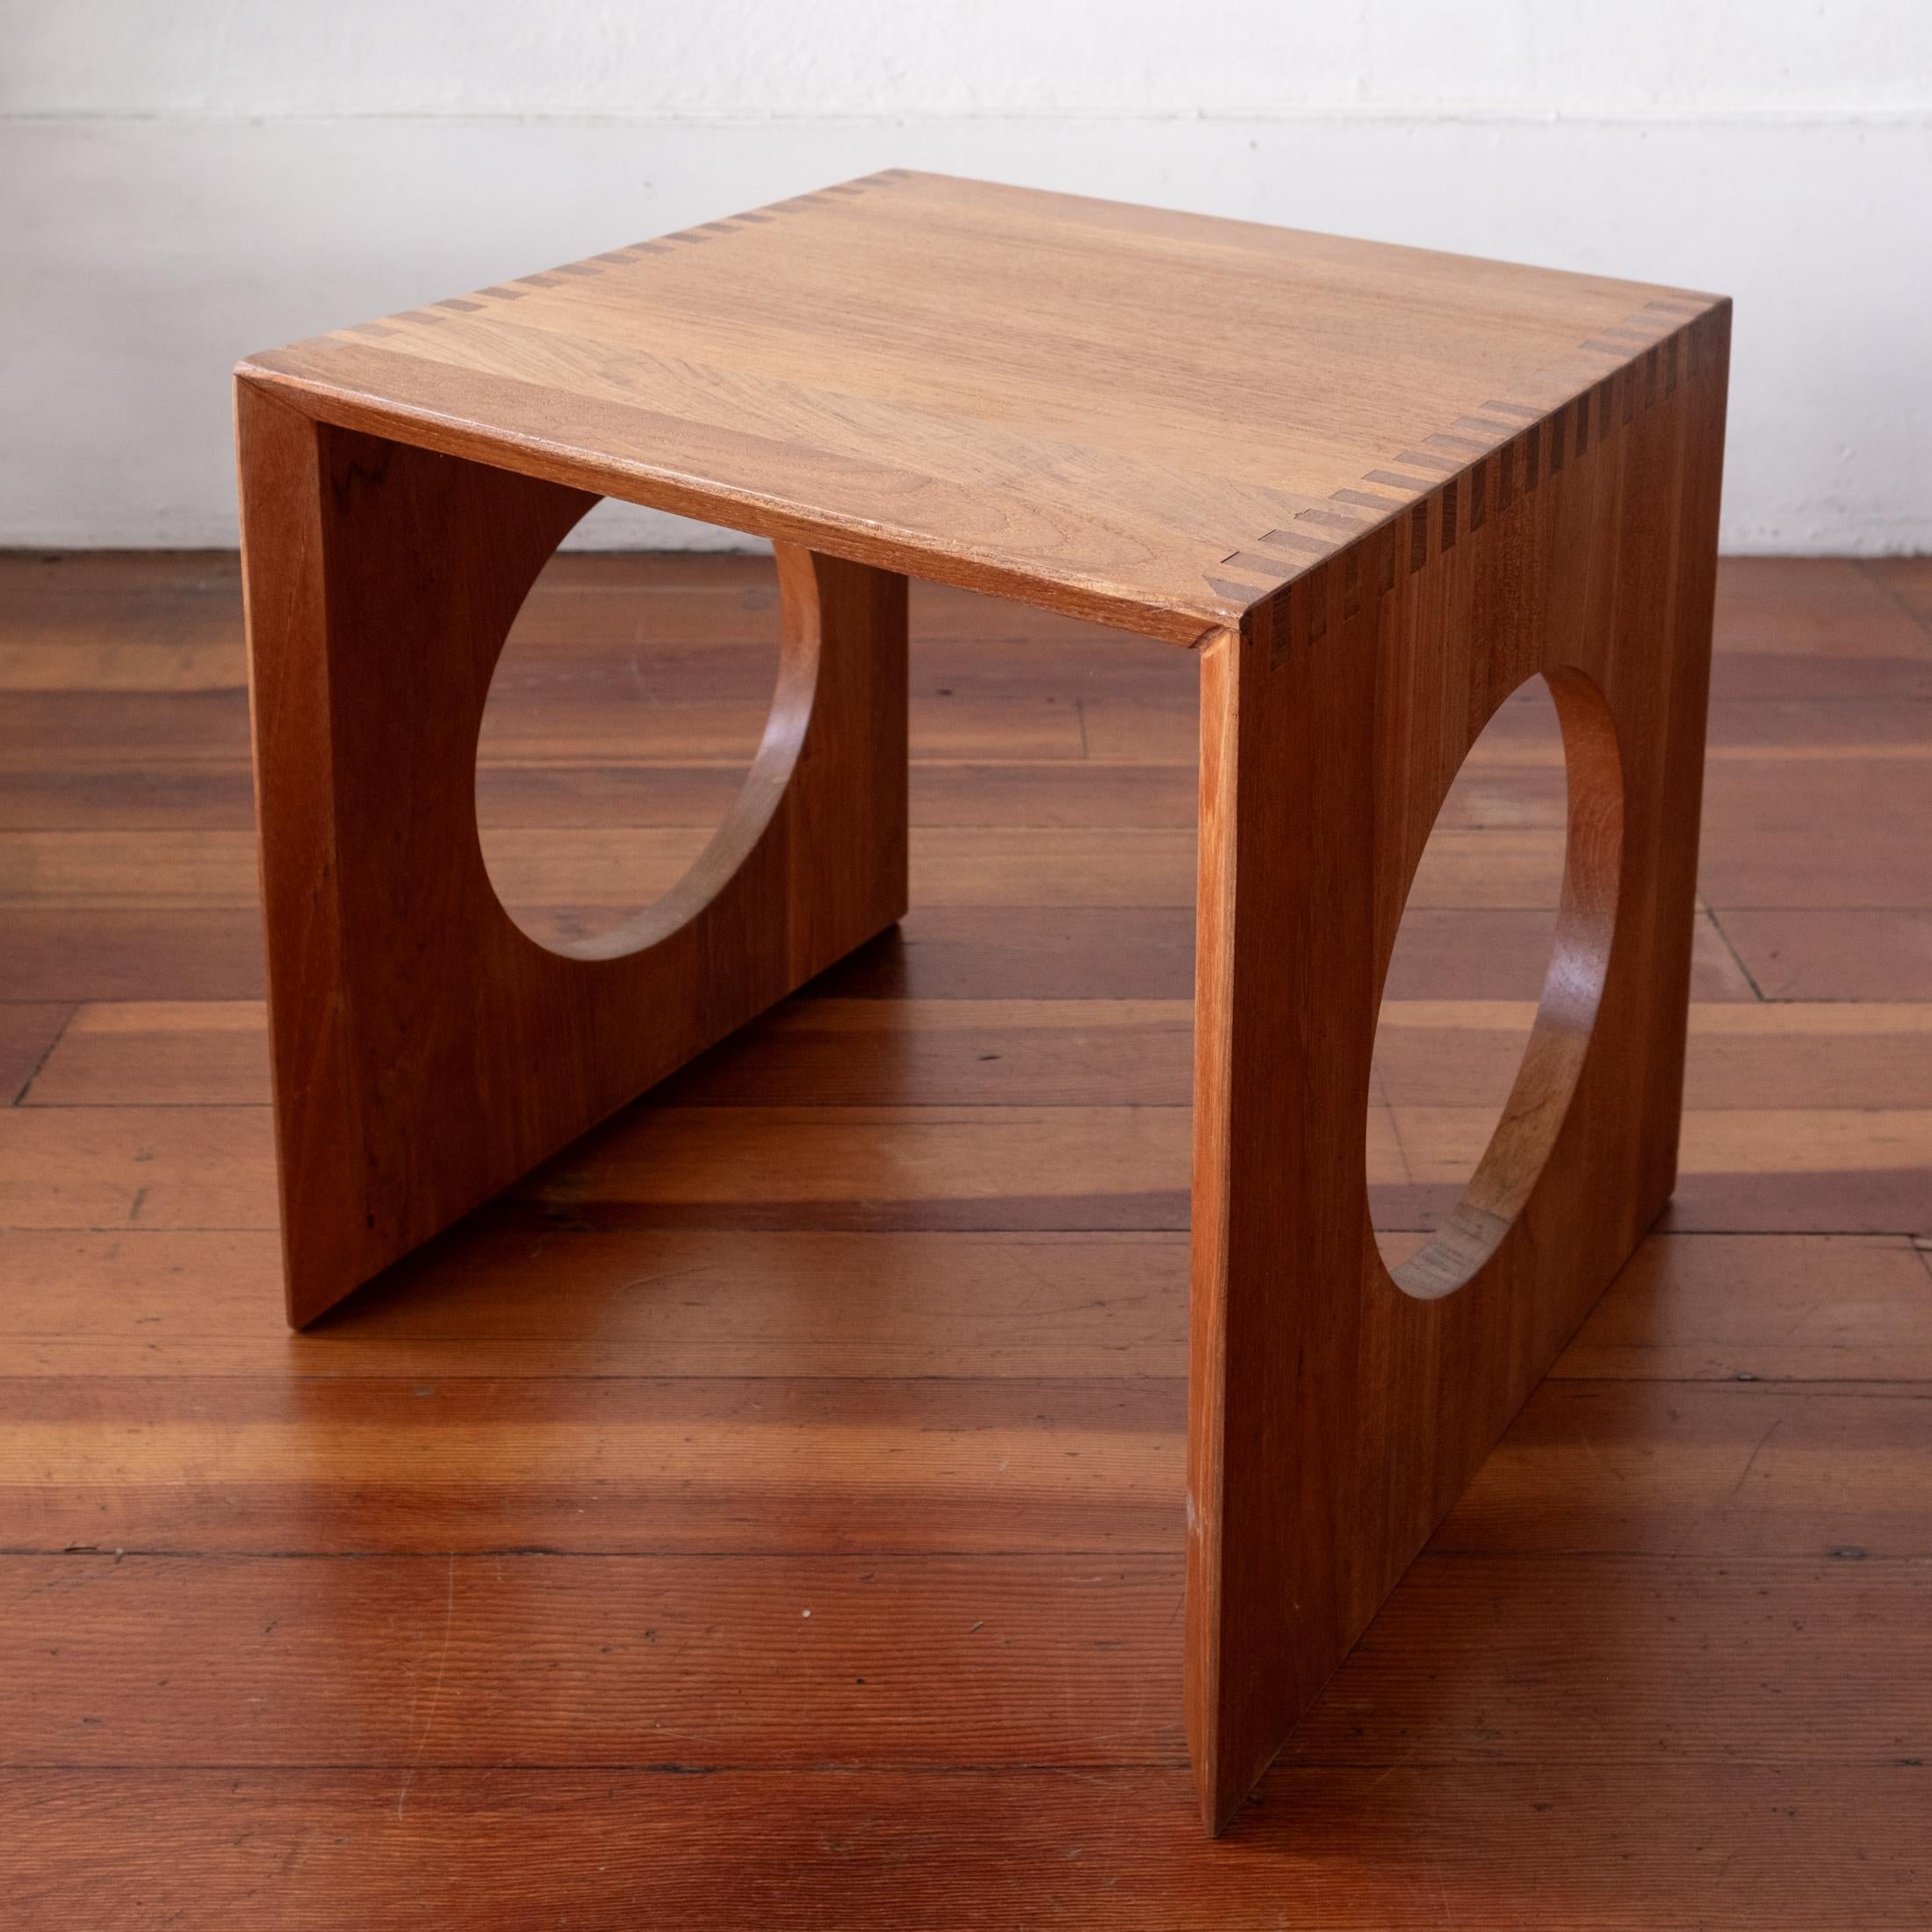 Danish Modern occasional by Nissen. Dovetail joinery.  1960s